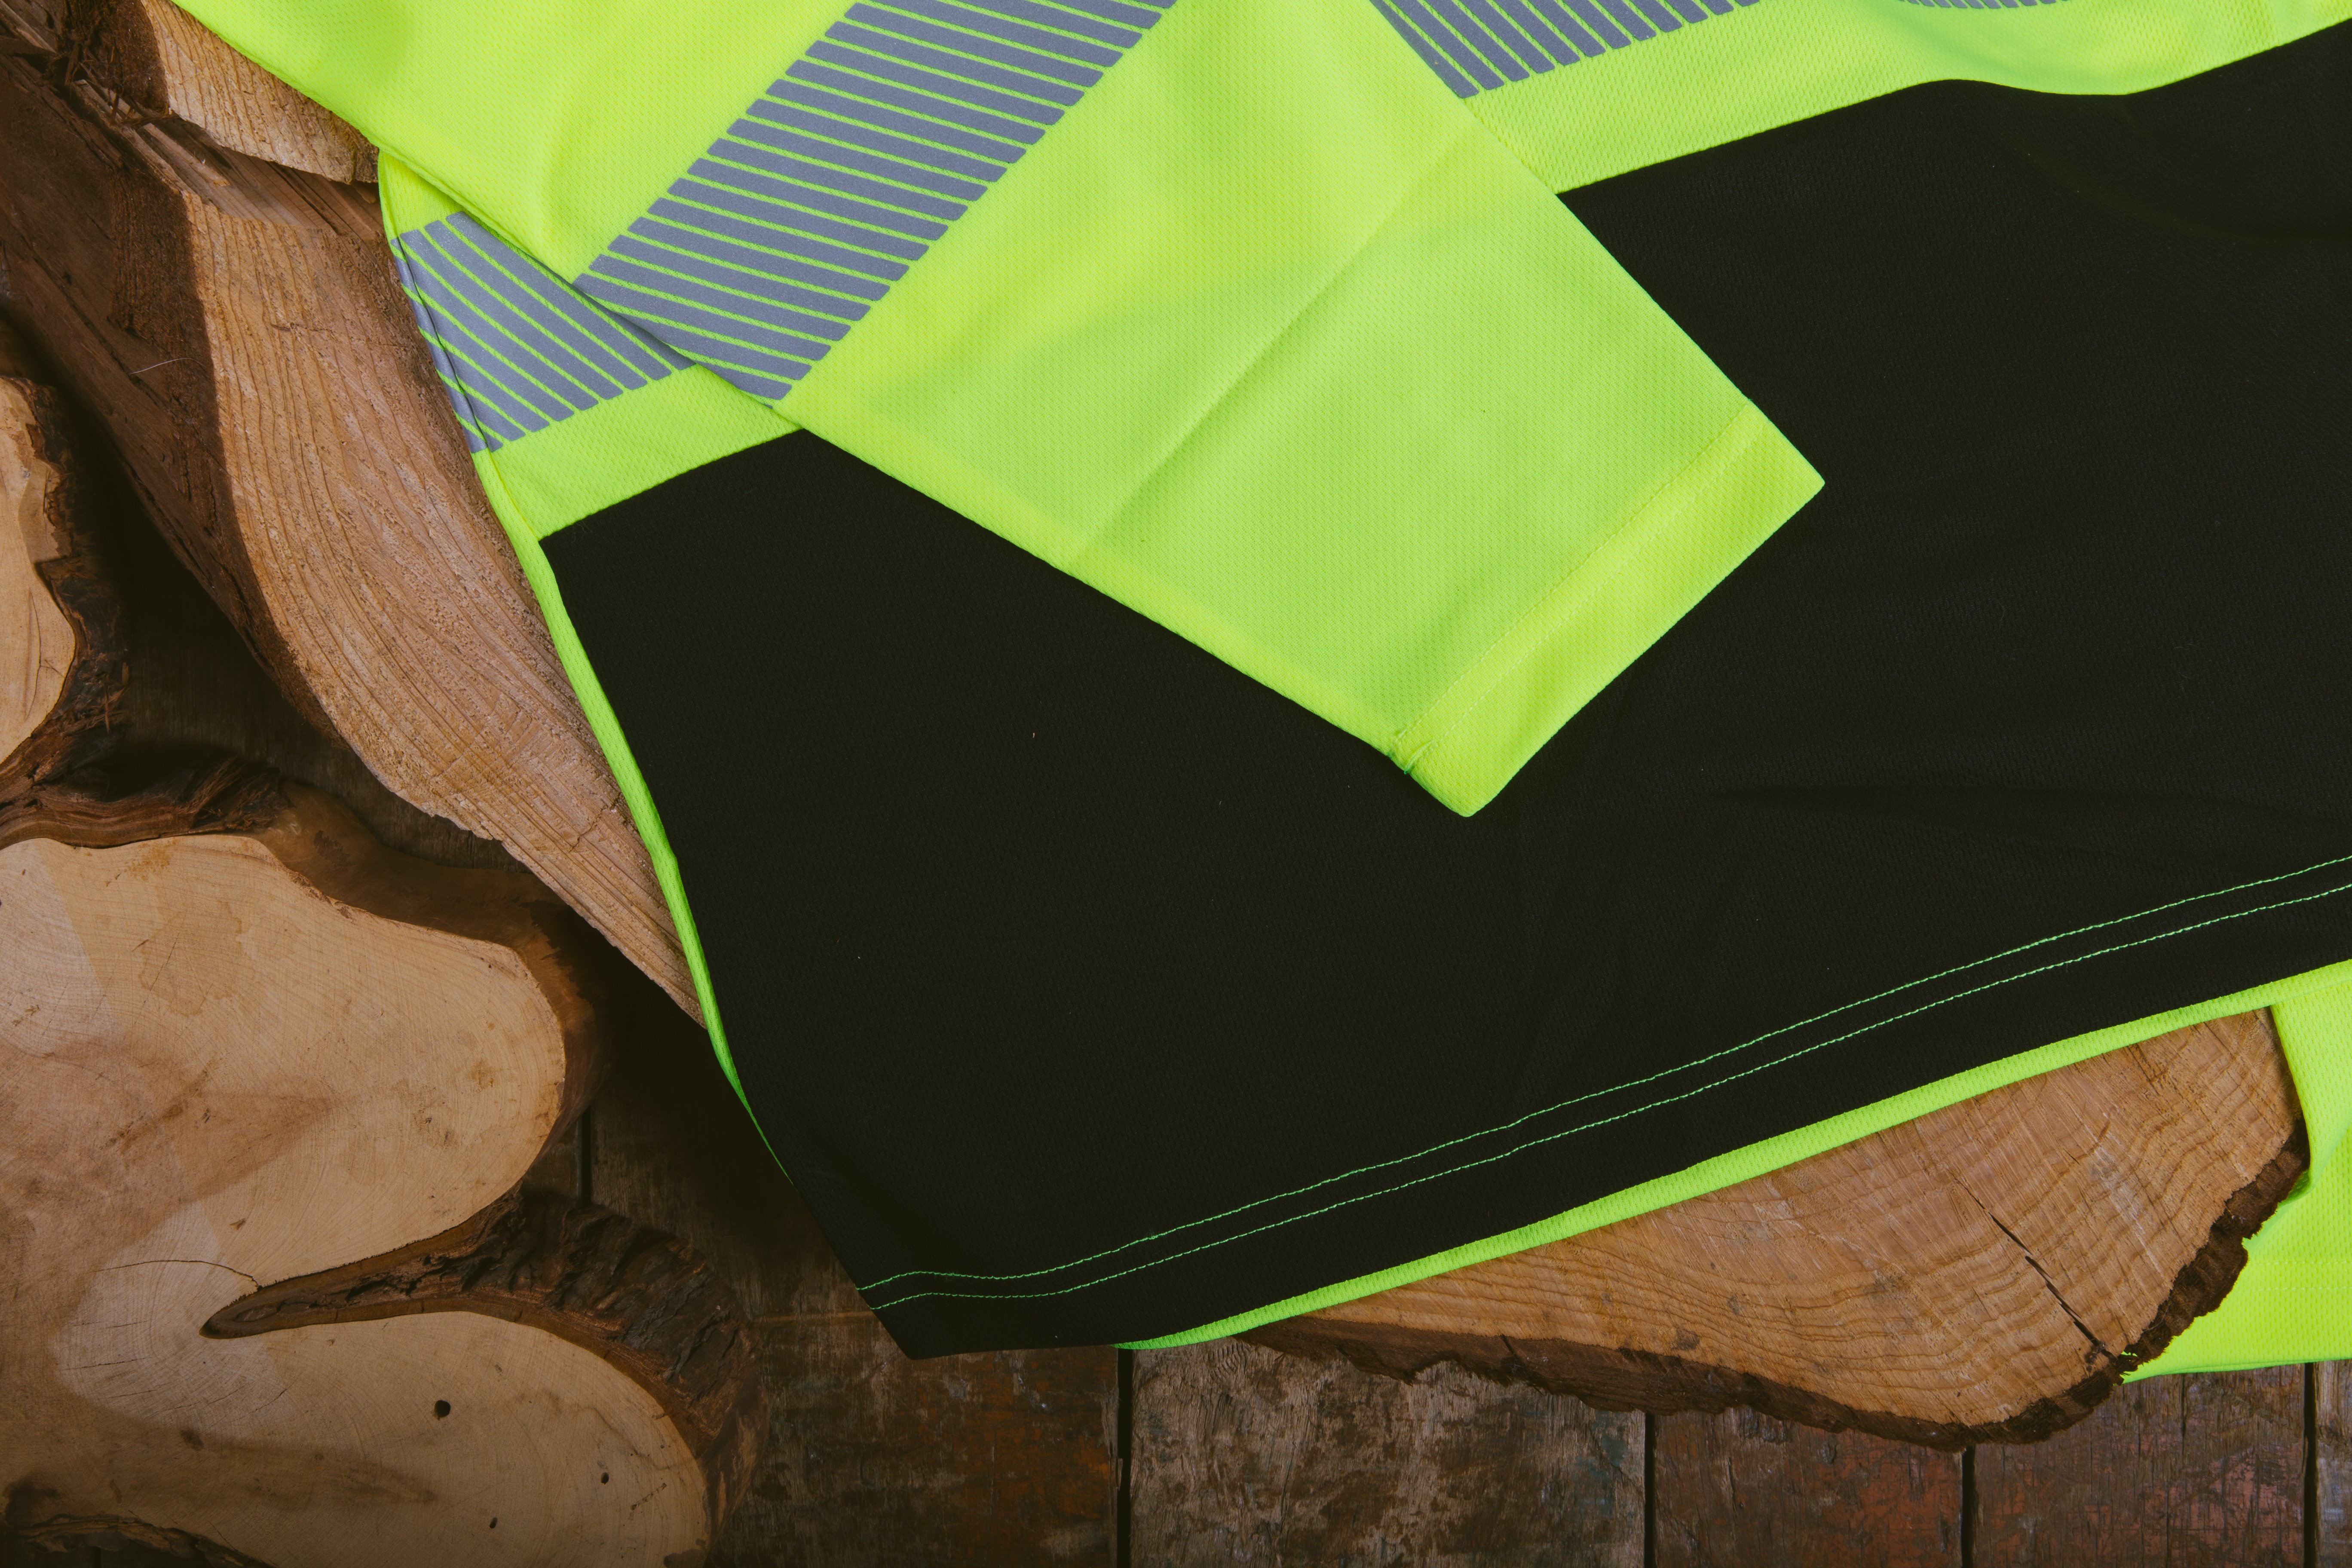 Premium Shade 2-Tone Long Sleeve T-Shirt HVSA Class 3 from Arborwear. This safety garment is moisture wicking, fast drying, and made with stain-resistant fabric. It is ideal for jobs like construction, linework, groundsmen, and other green industry professions where staying seen is priority. It is ANSI/ISEA 107-2020 Type R, Class 3 Compliant, NOT FR